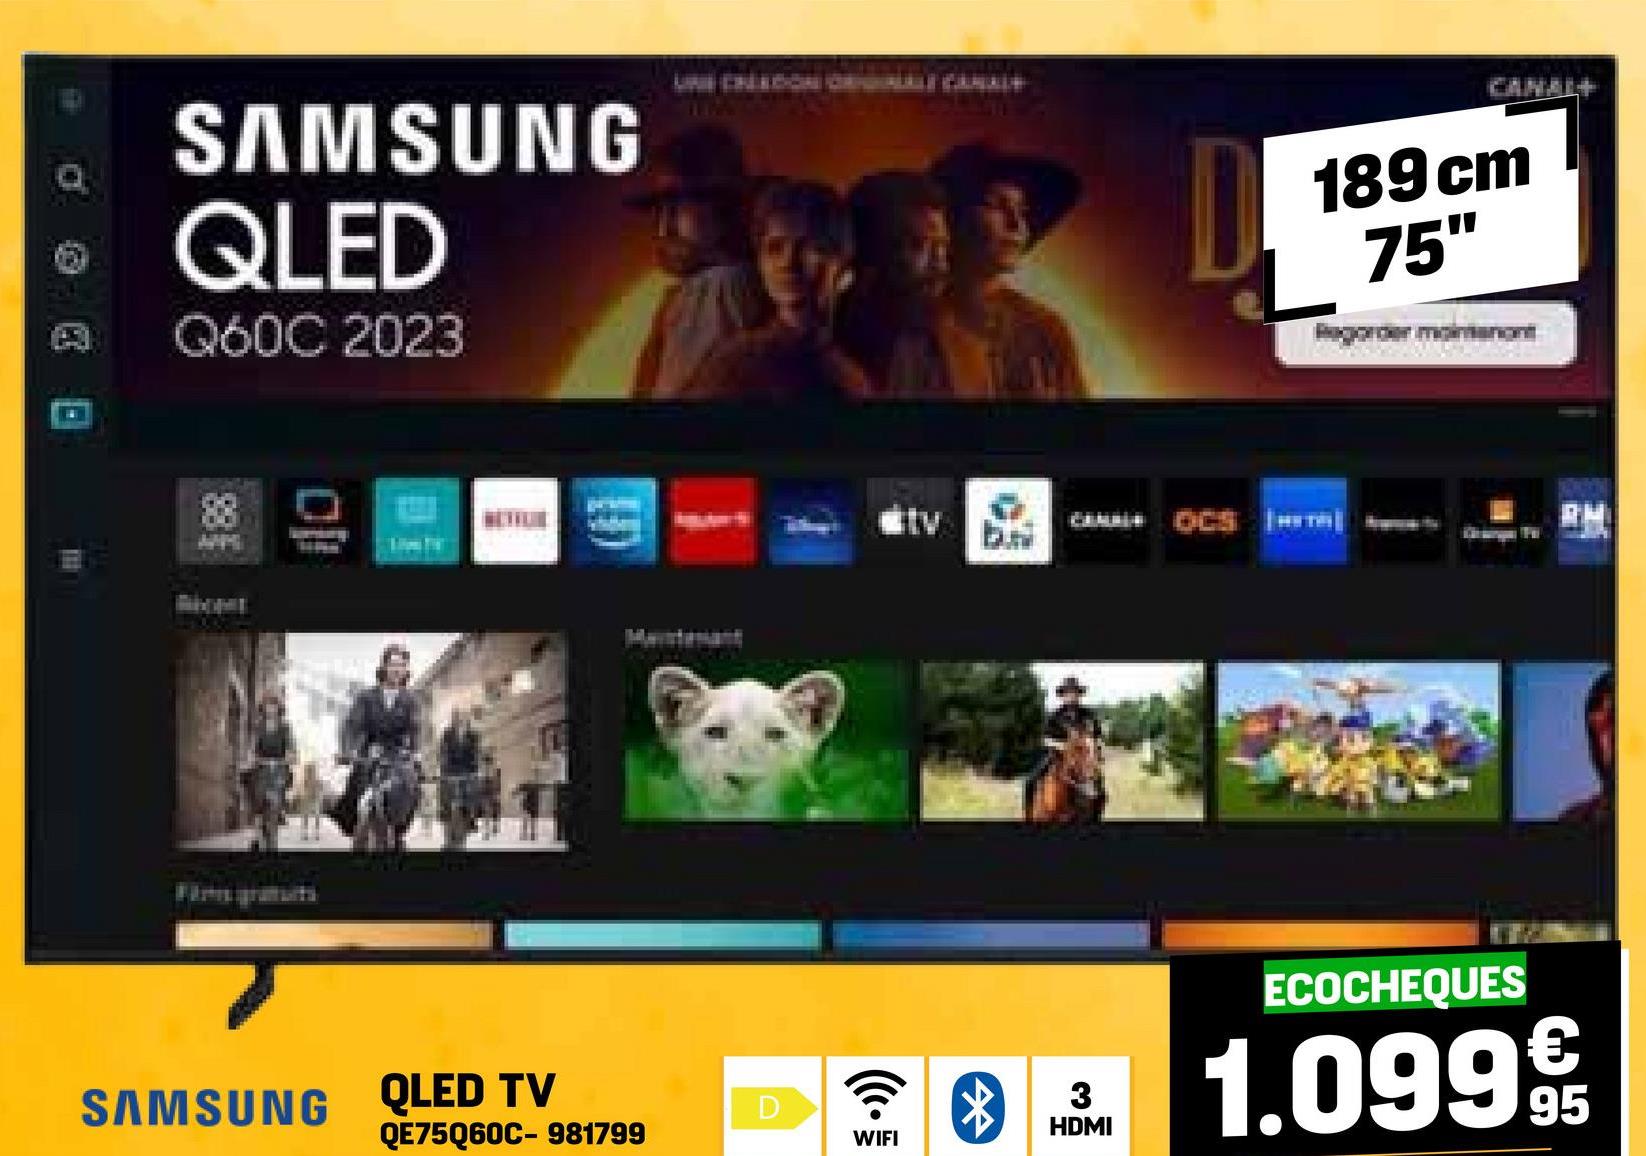 B
SAMSUNG
QLED
Q60C 2023
口
SAMSUNG QLED TV
QE75Q60C-981799
tv
ECOCHEQUES
D
WIFI
01.0999
CANAL+
189cm
75"